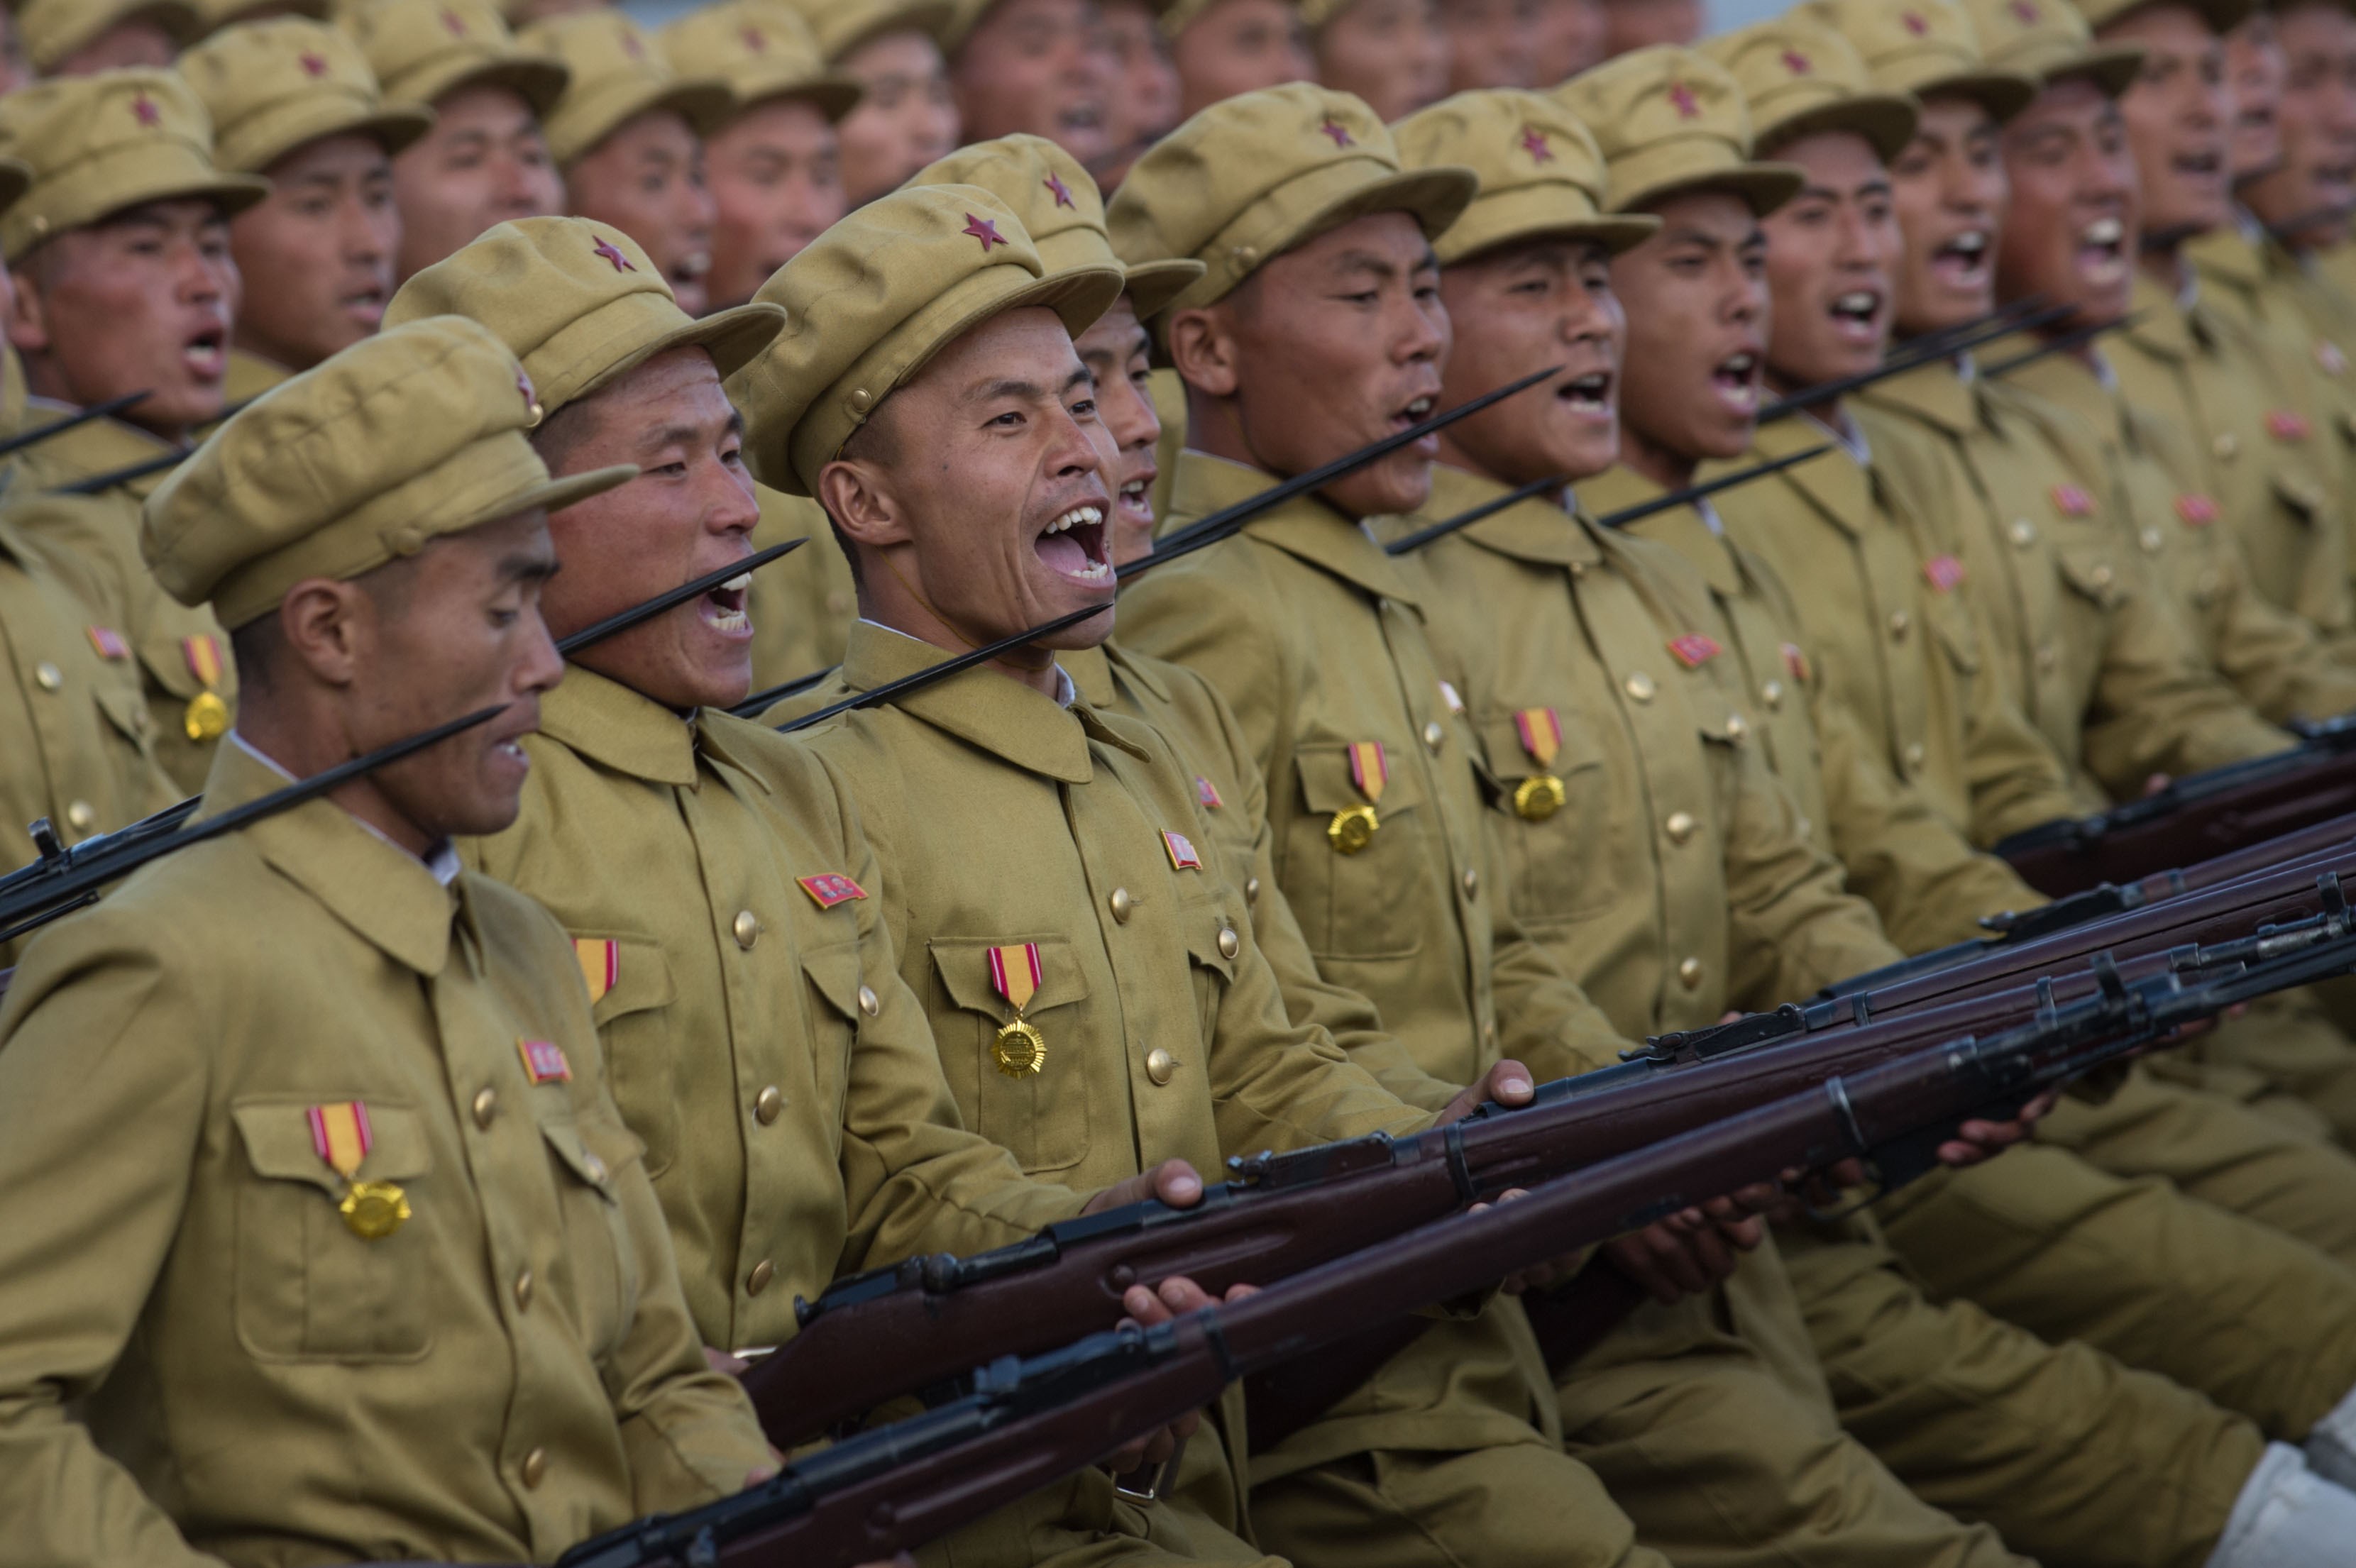 North Korean soldiers march during a mass military parade at Kim Il Sung Square in Pyongyang on Oct. 10, 2015 (Ed Jones—AFP/Getty Images)